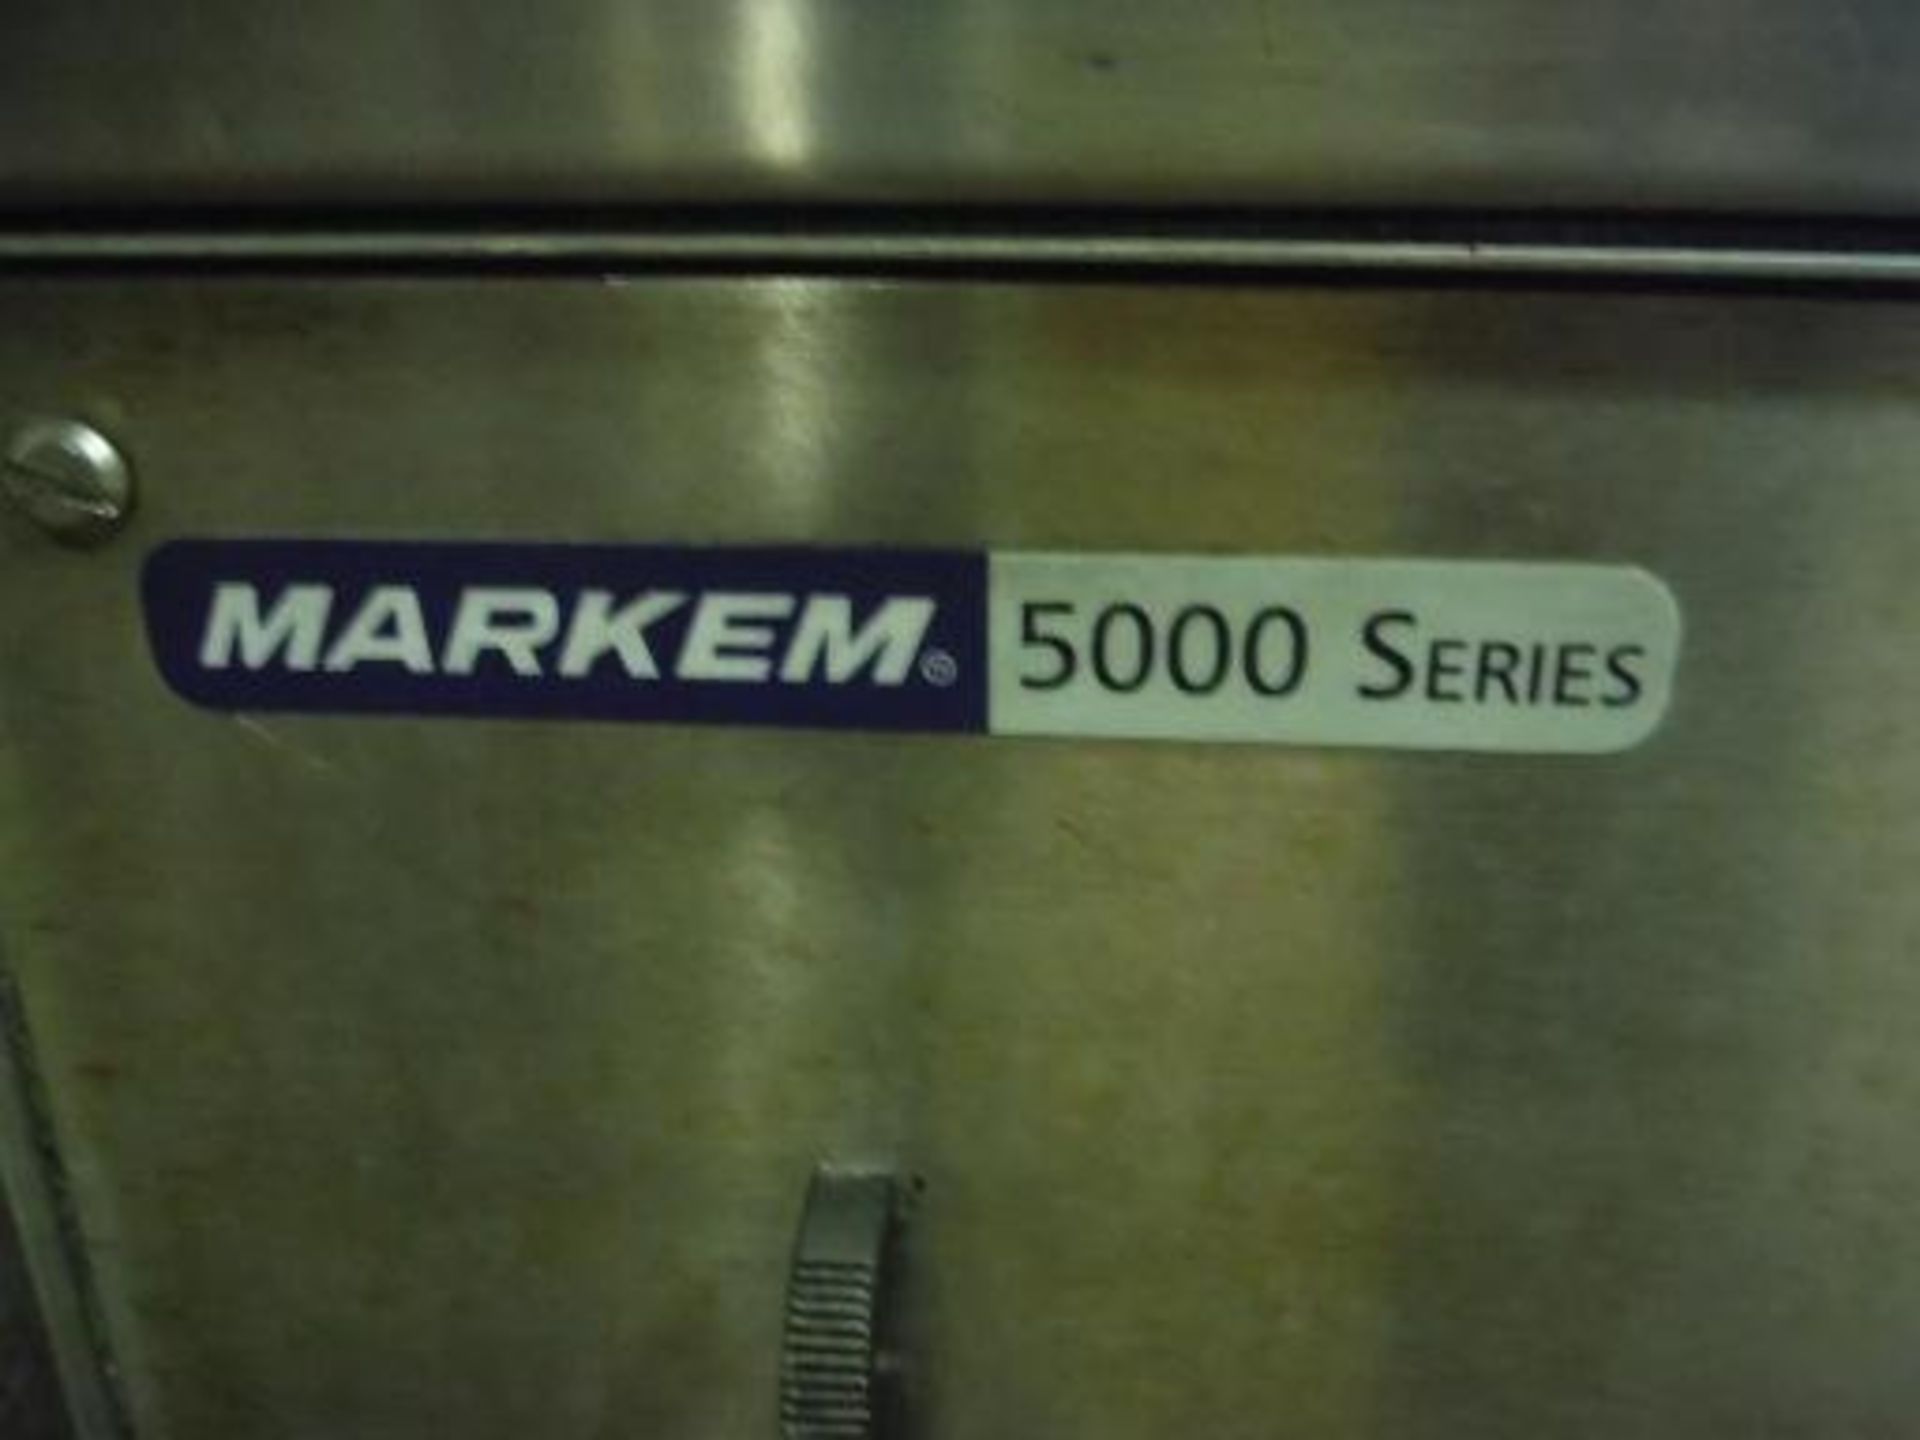 Markem code dater 5000 series, Model 5400, SN 042236 (ET-31866) This Item Is Located in Quincy, - Image 3 of 5